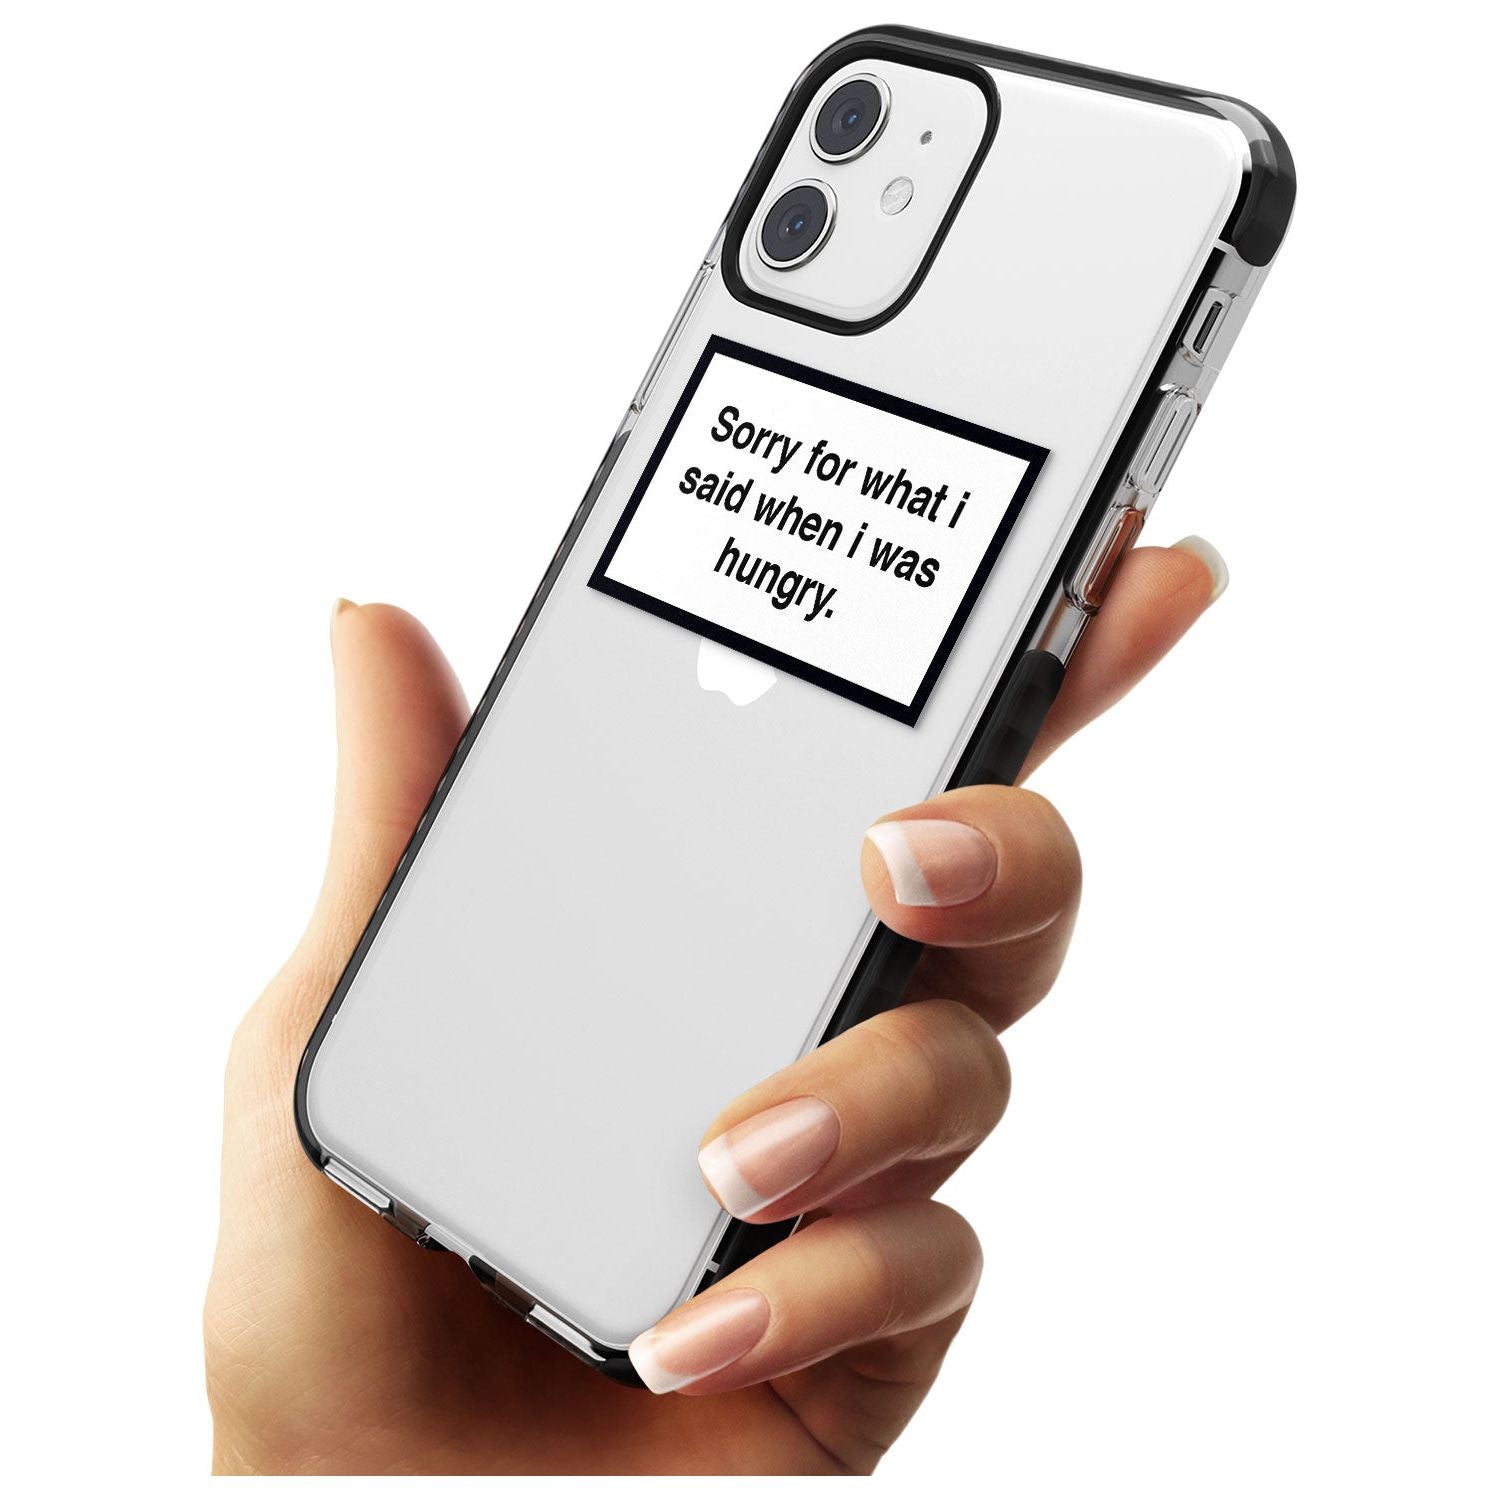 Sorry for what I said iPhone Case   Phone Case - Case Warehouse